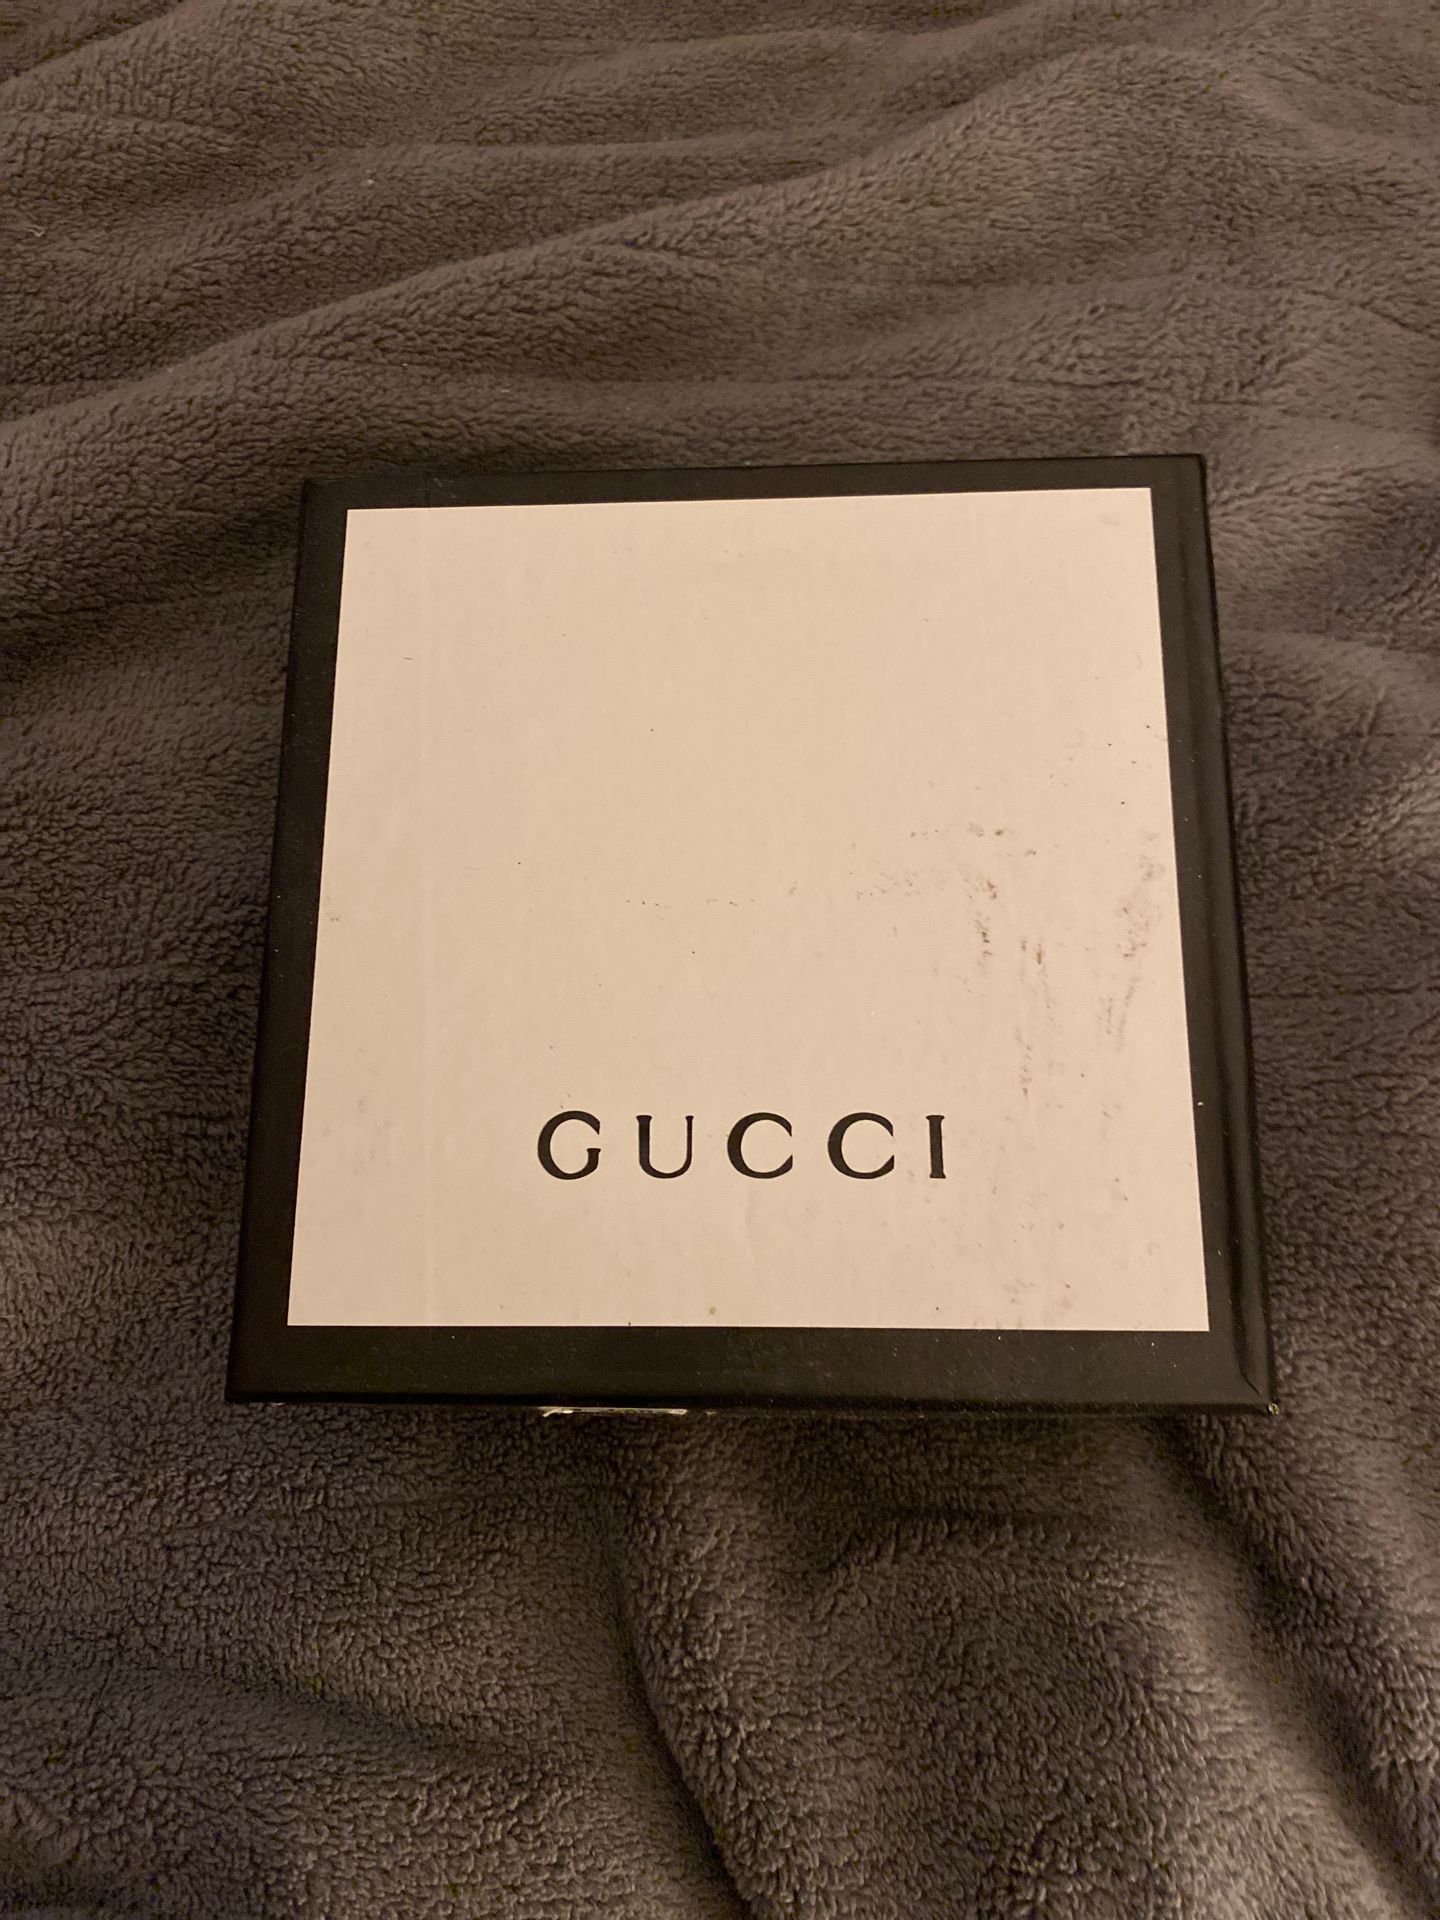 Brand new Gucci wallet